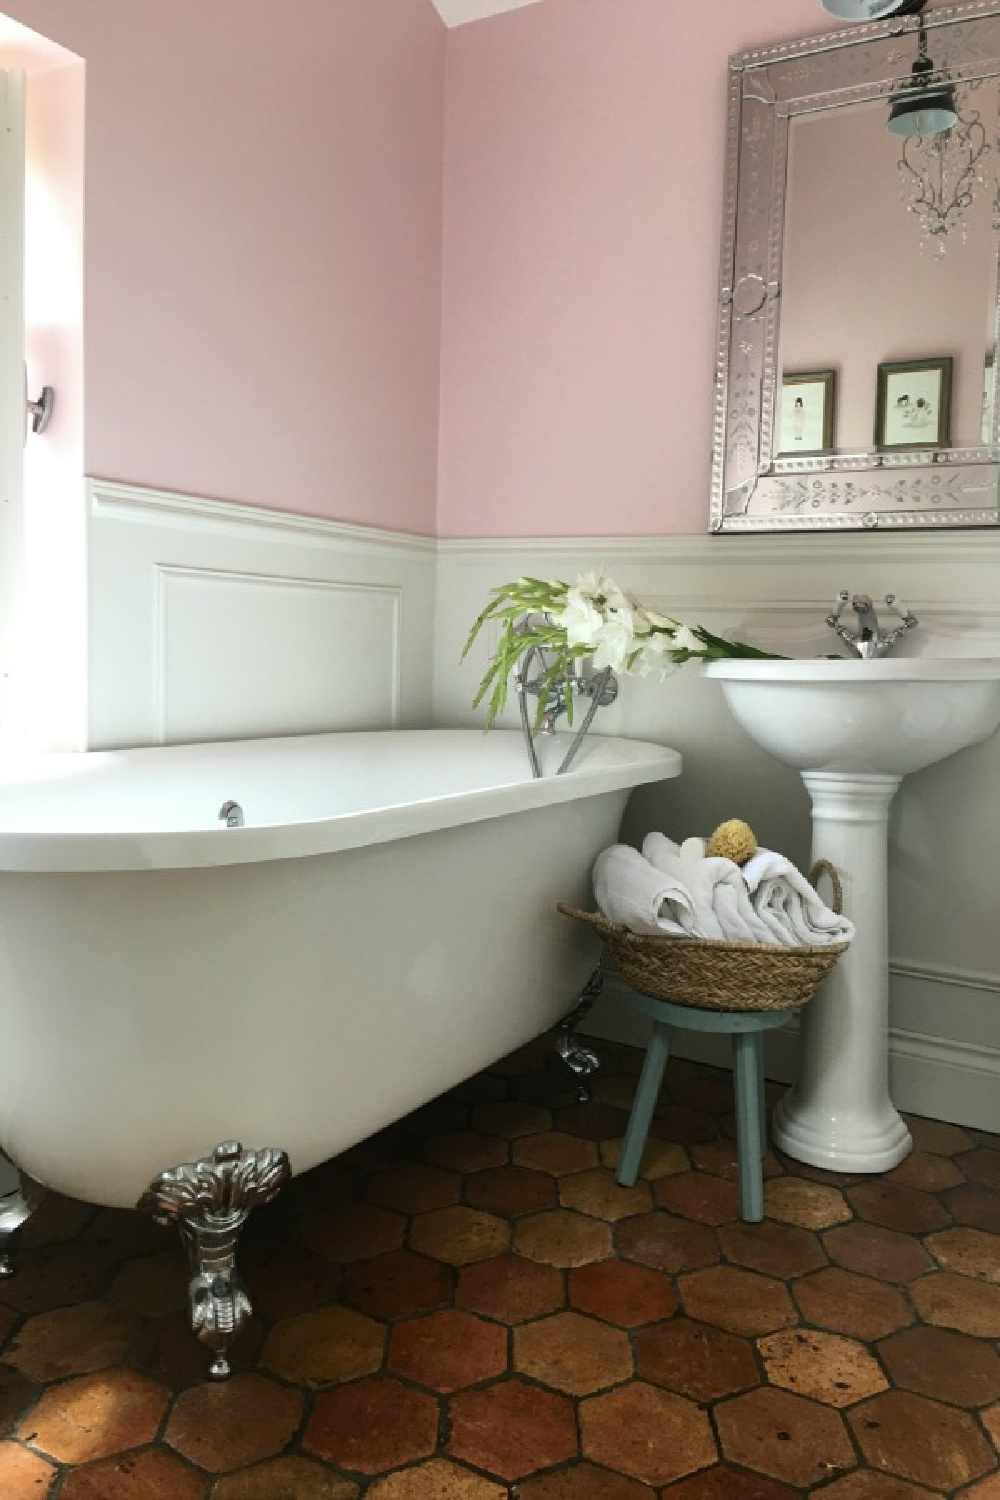 Middleton Pink (Farrow & Ball) painted walls in a French country bathroom with clawfoot tub - Viivi et Margot.